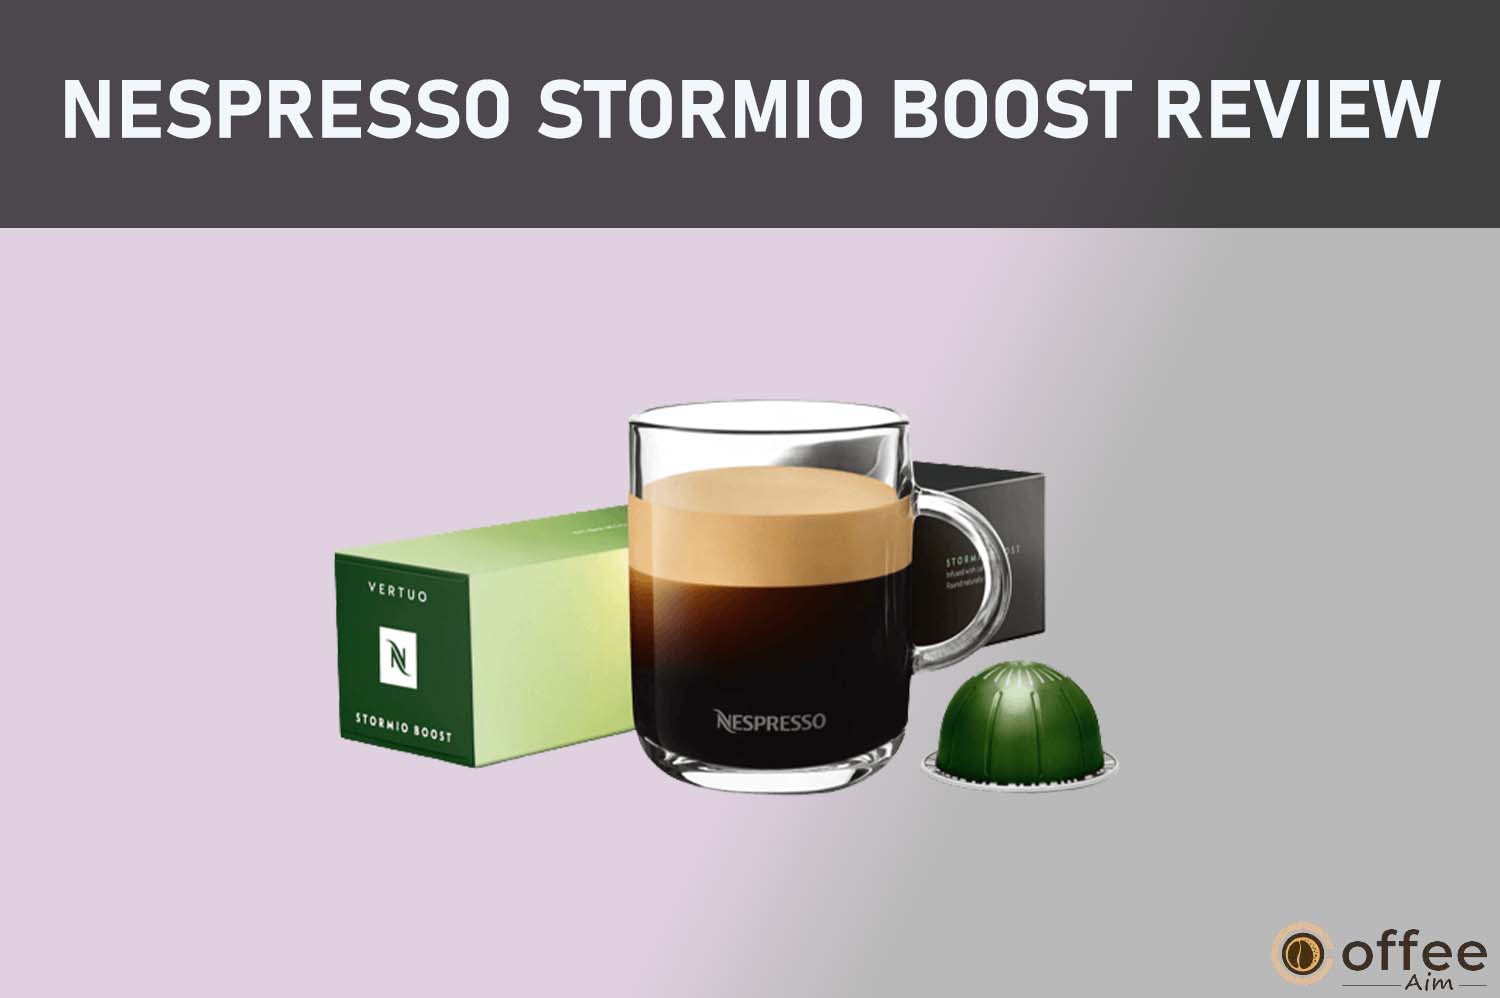 Feature image for the article "Nespresso Stormio Boost Review"